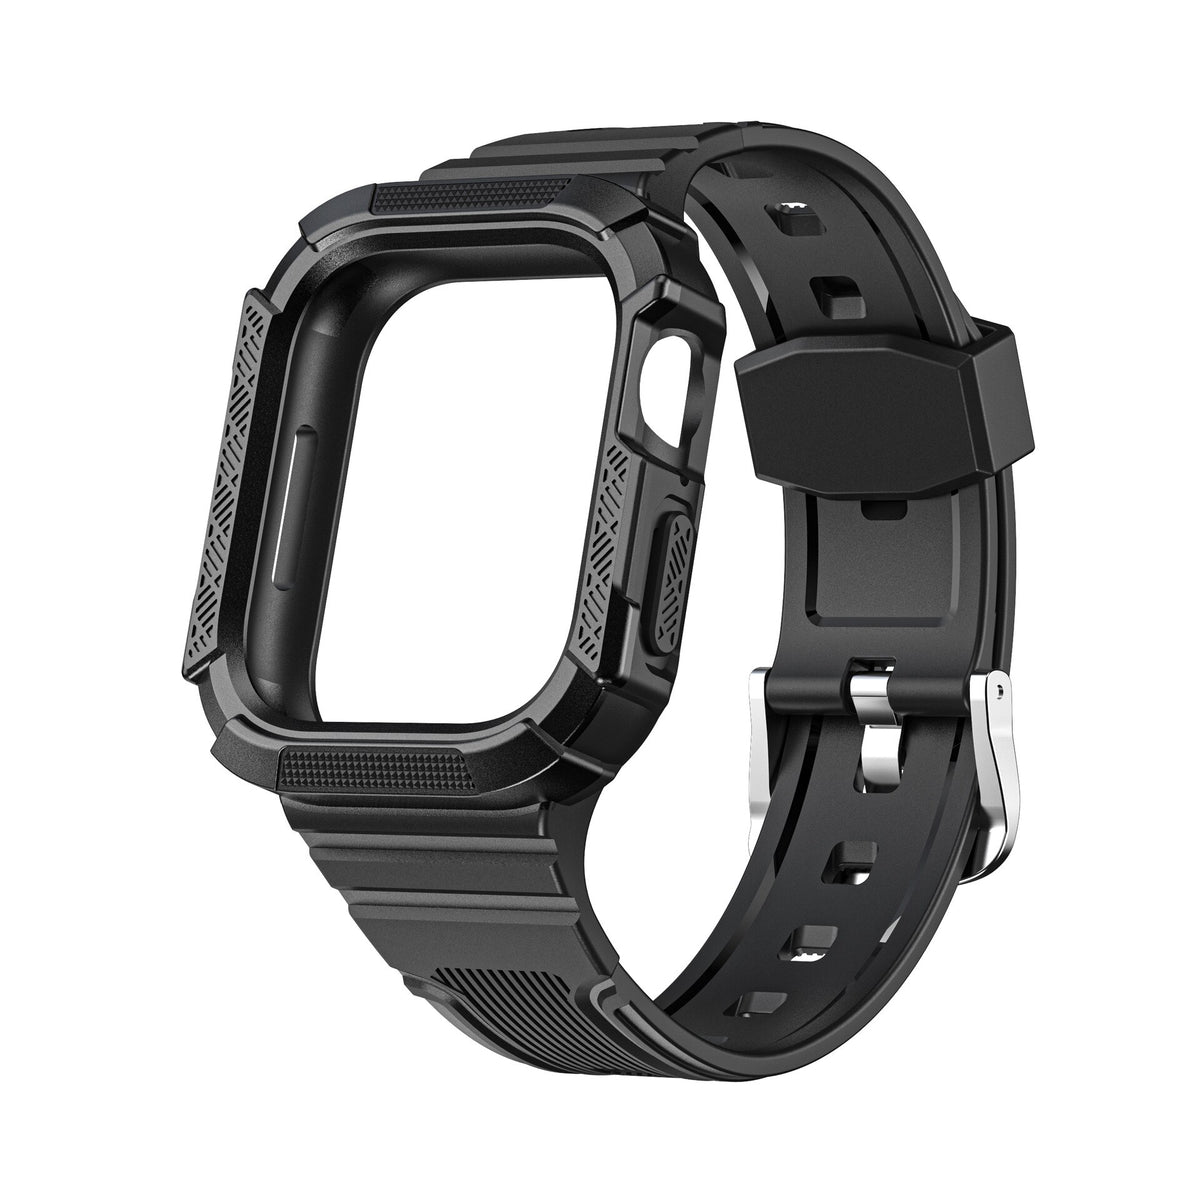 Sport Clear Apple Watch Band+Case